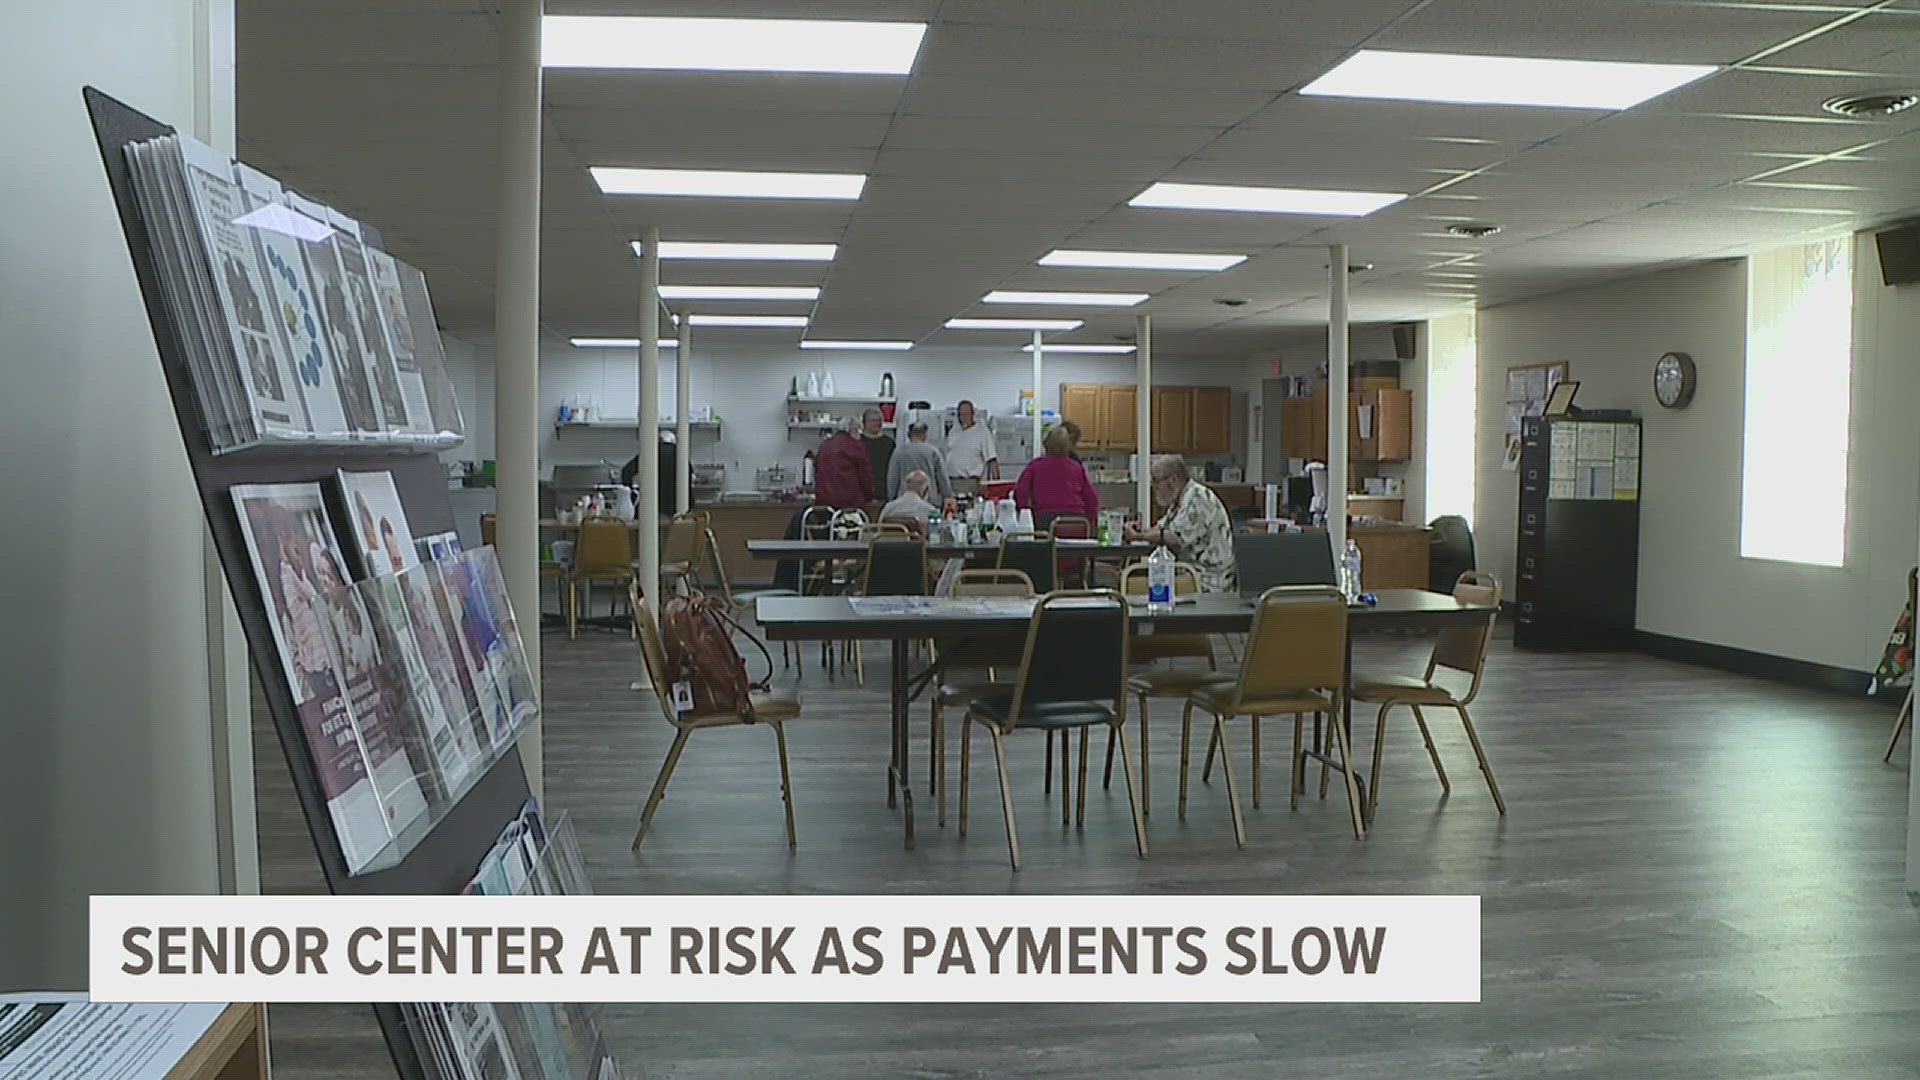 The Mercer County Senior Center Executive Director said between monthly state funds, a one-time grant fund and ARPA, the center is owed $61,000.